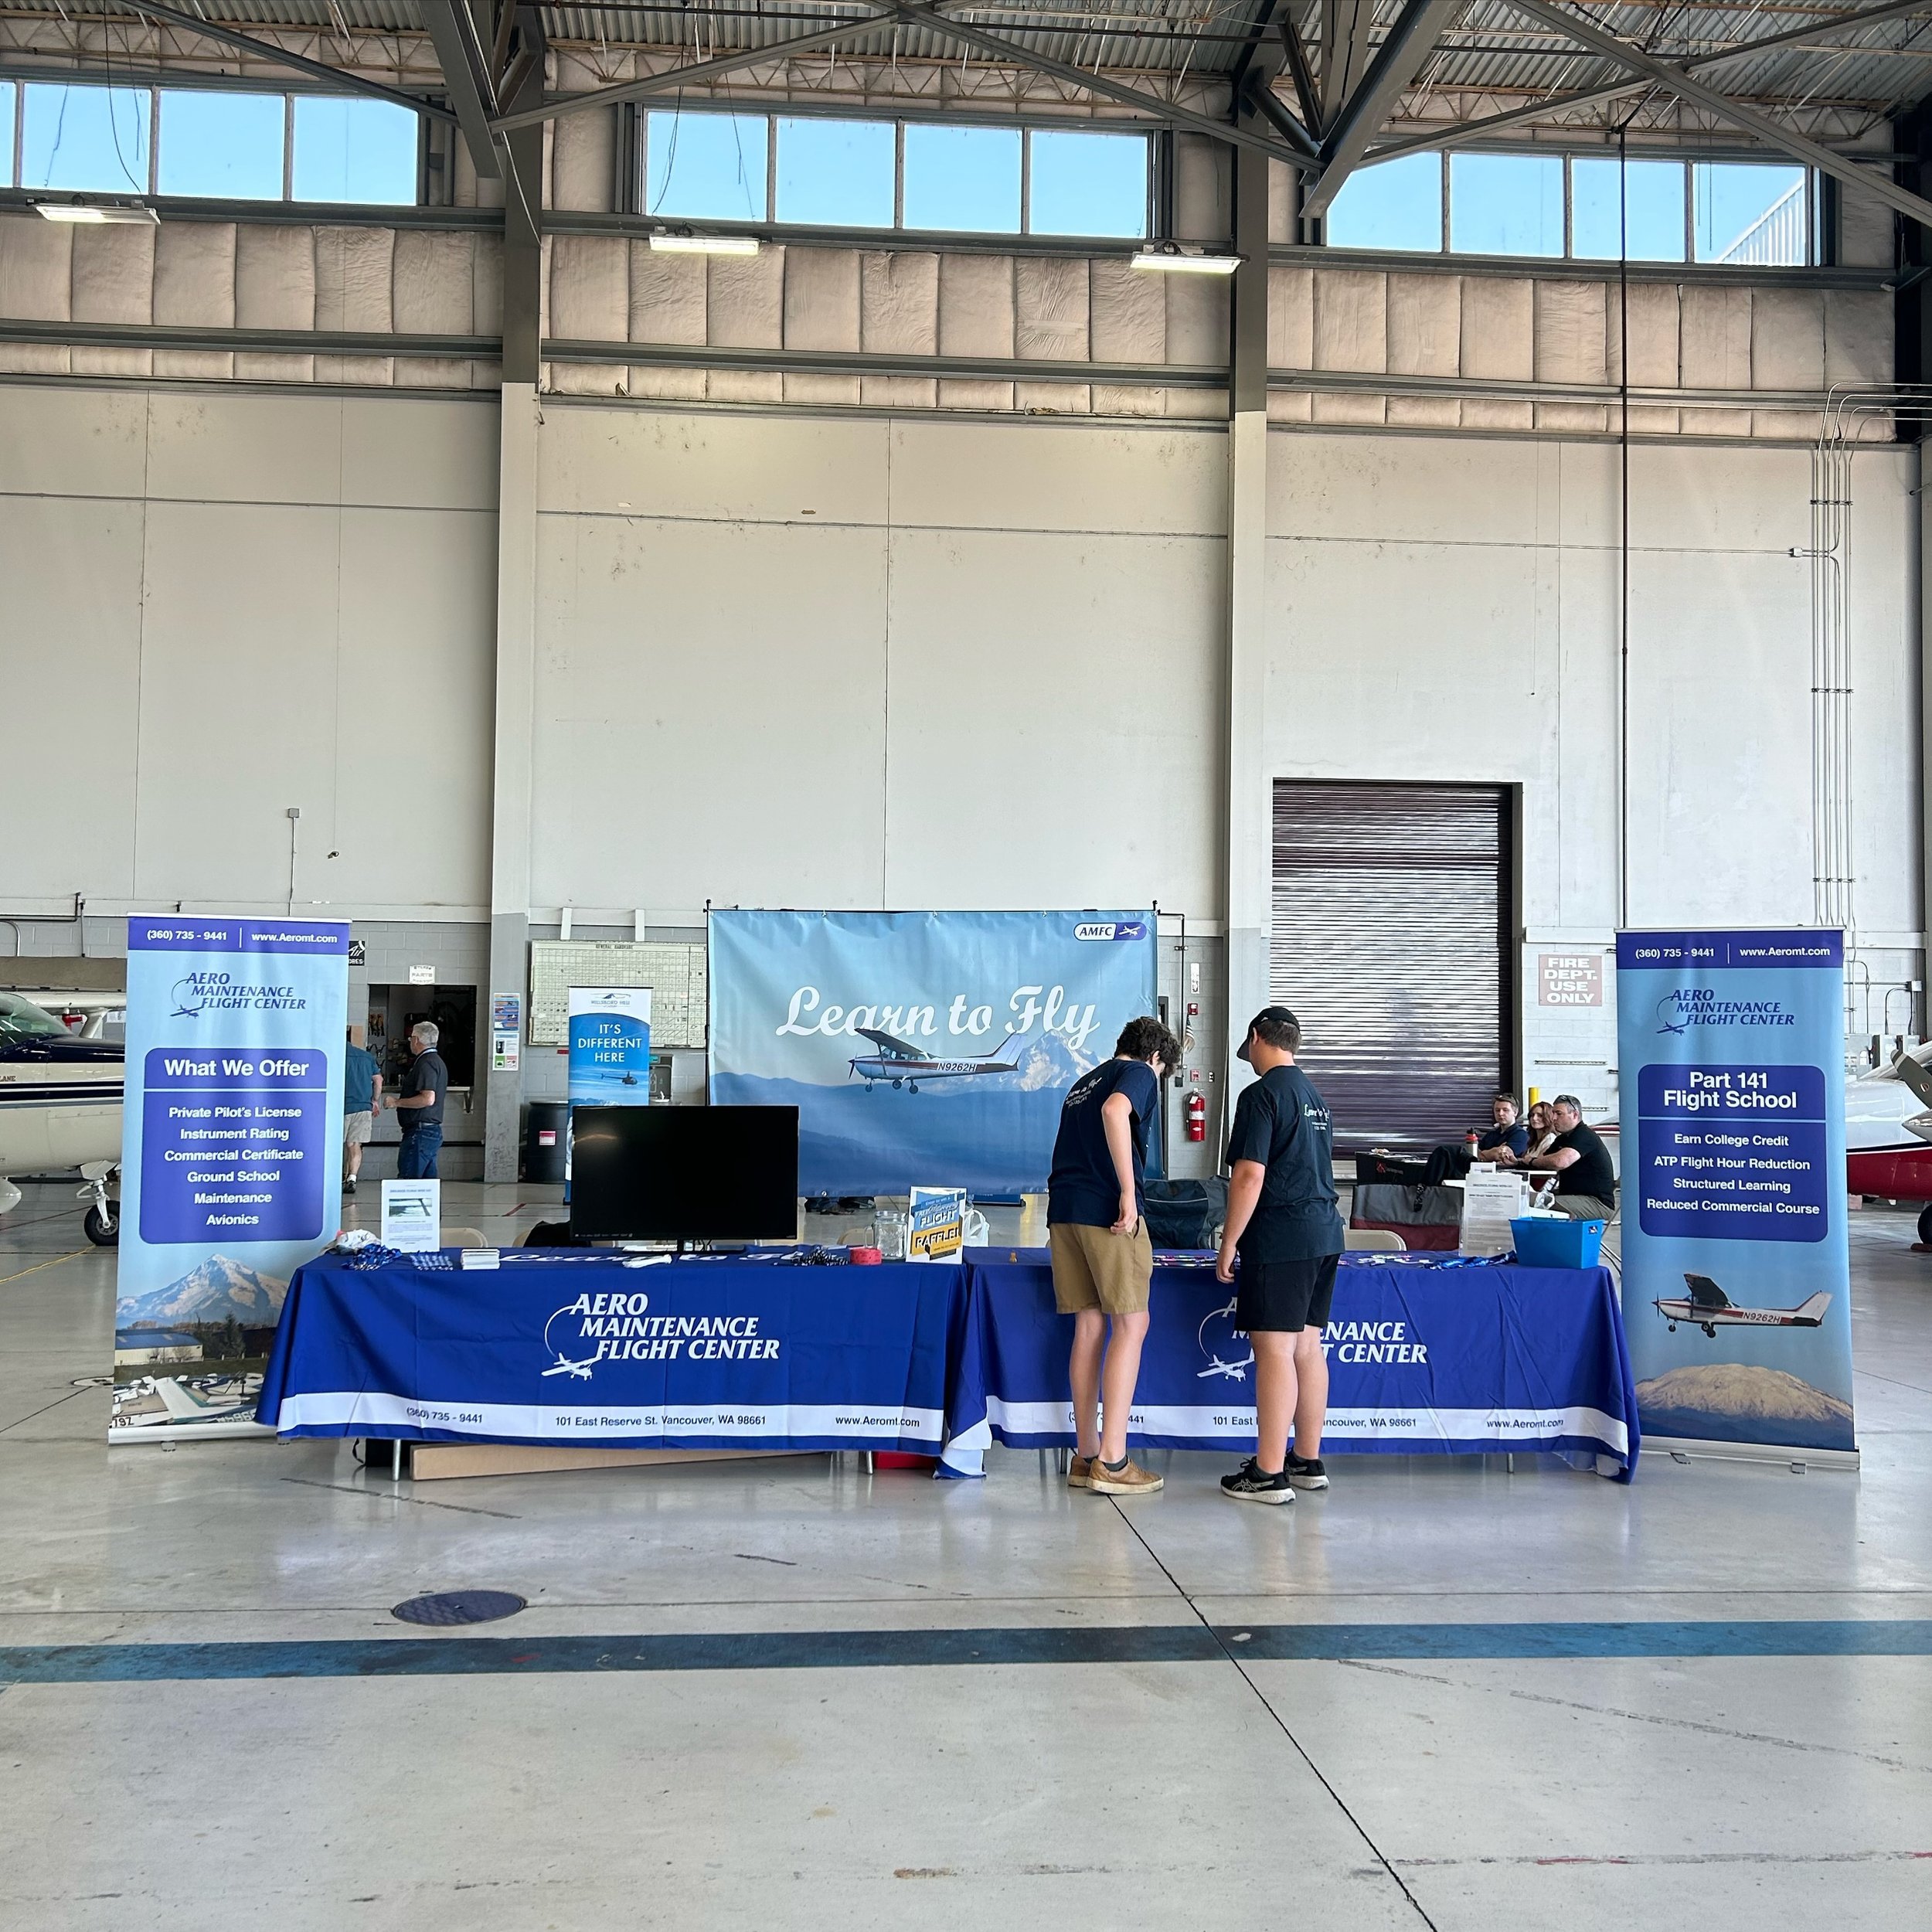 Come find us at Alaska Aviation Day today at PDX the Horizon hanger! Starting at 9am-3:30pm we will be here to answer any questions about flight school, getting your pilots license or maintenance. Learn how to preflight a plane with our very own N926